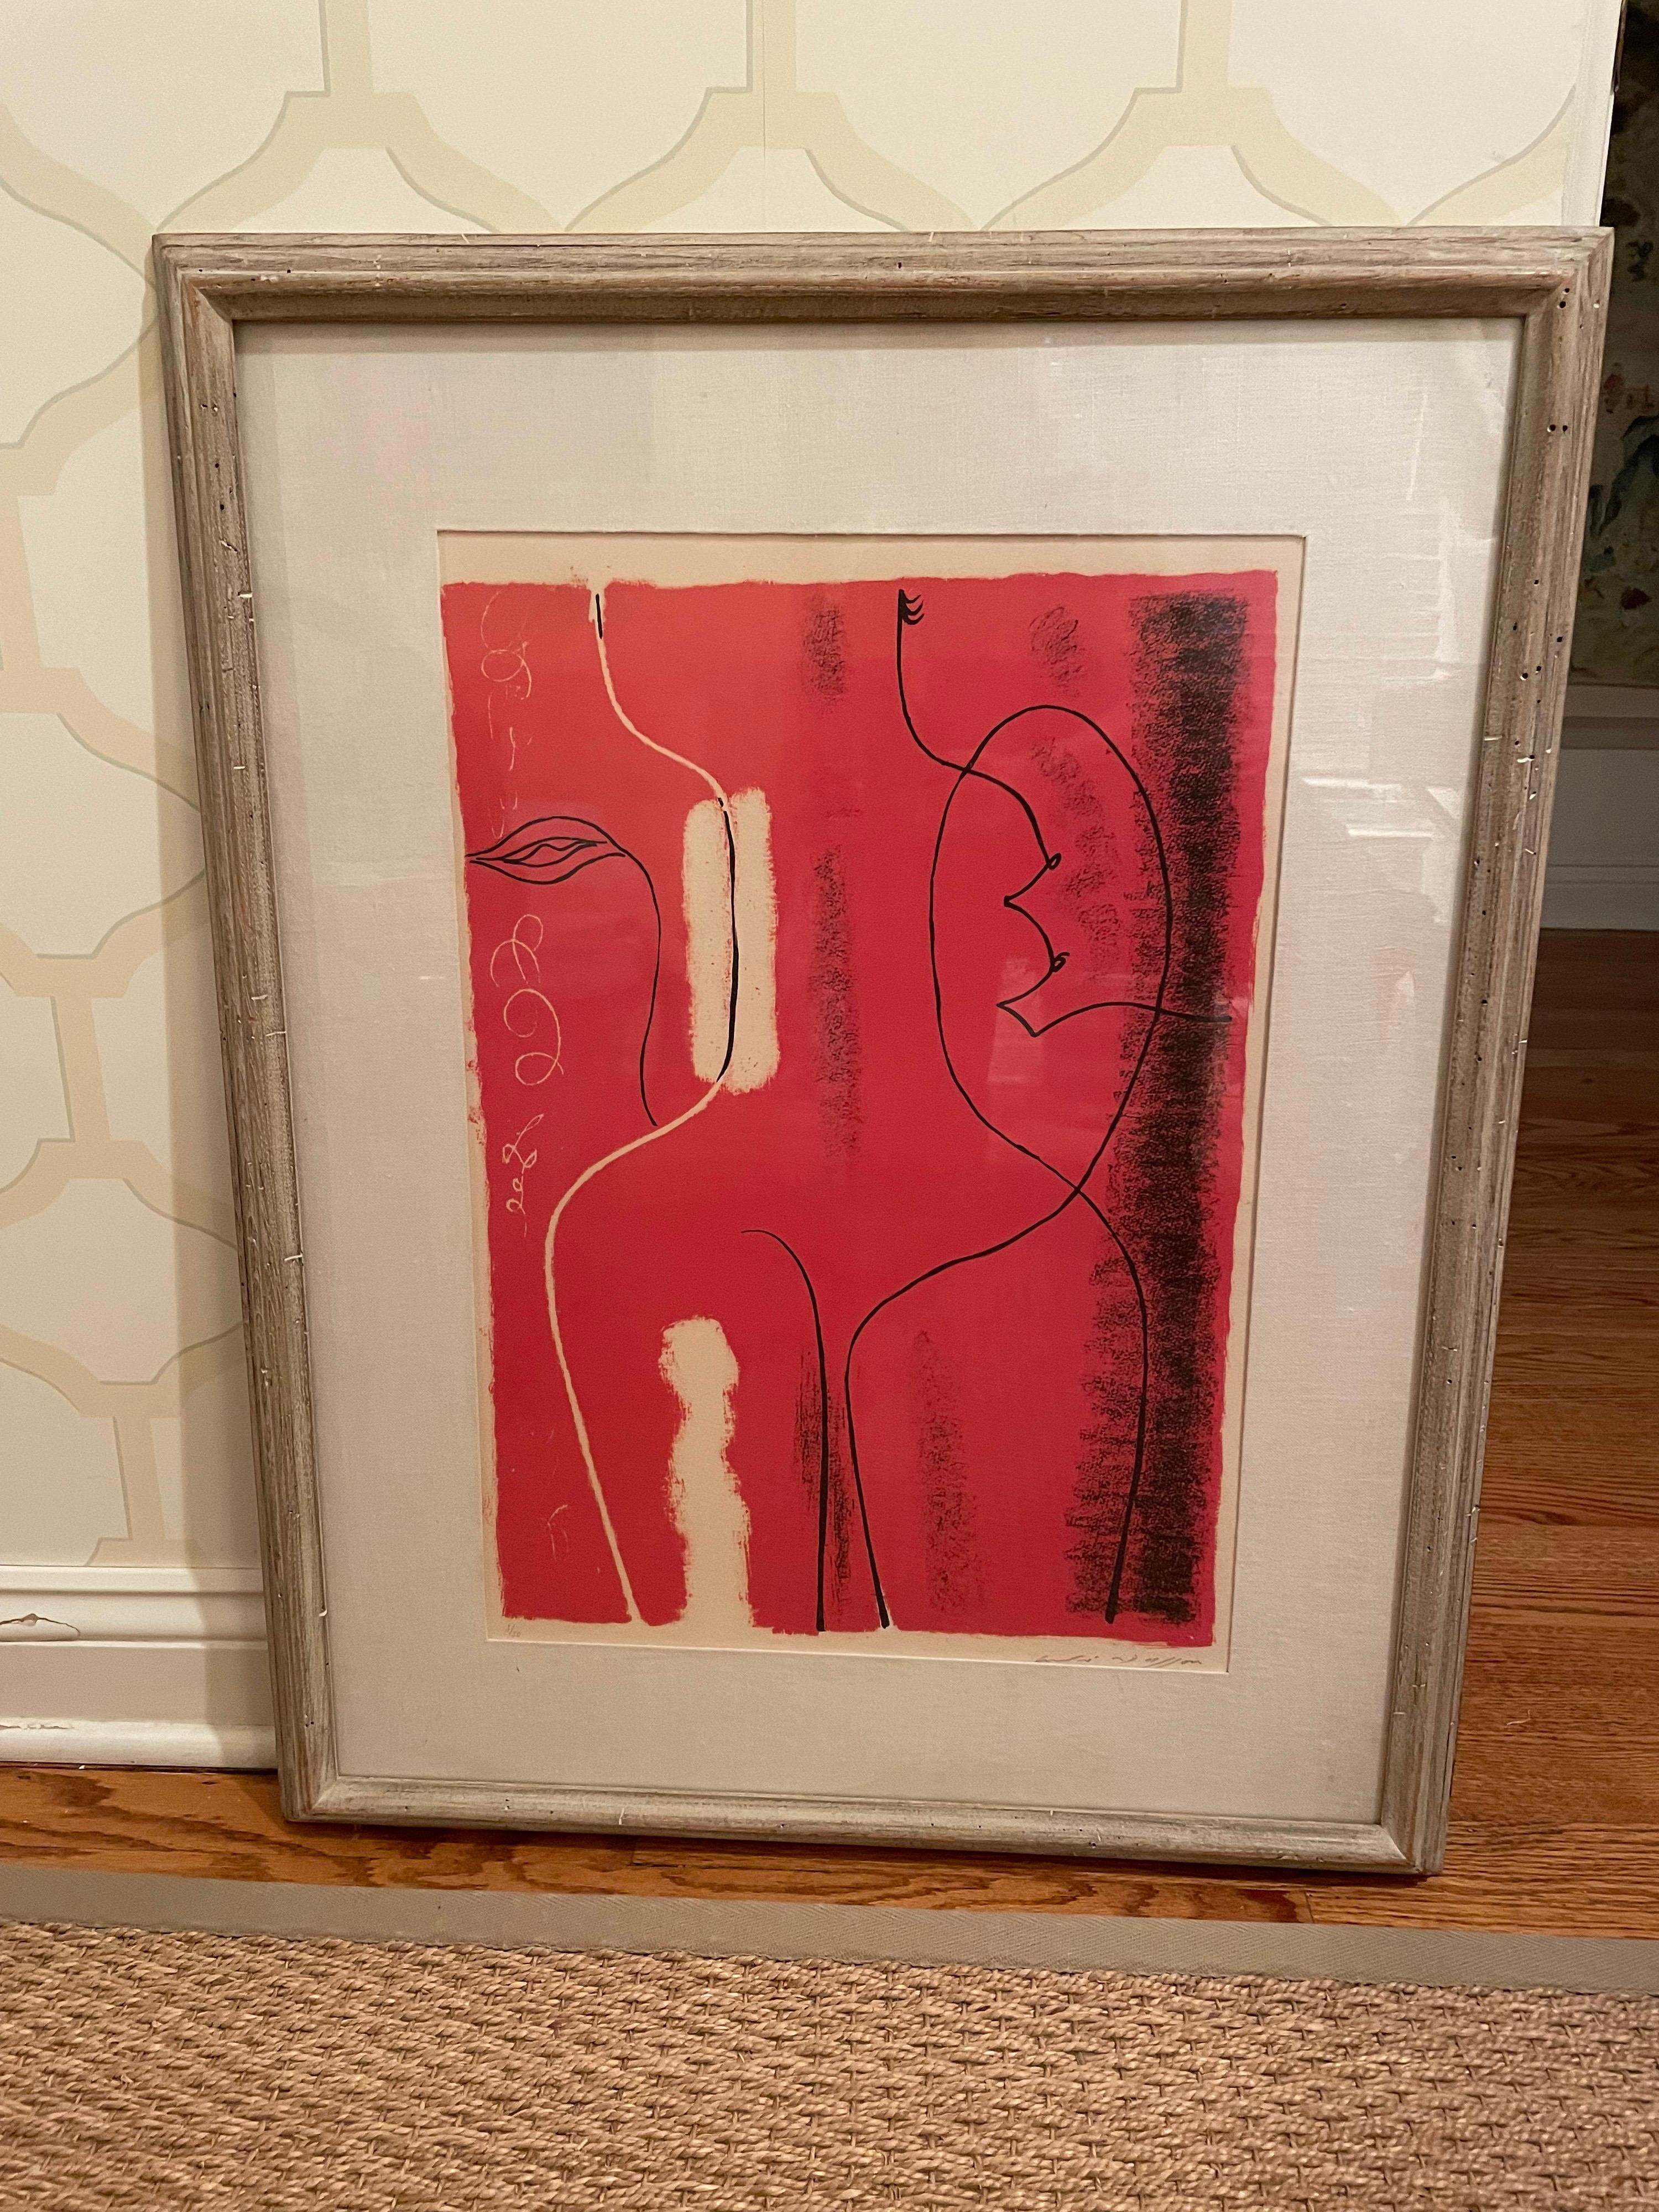 Mid-20th Century Andre’ Masson “Lombes” Lithograph